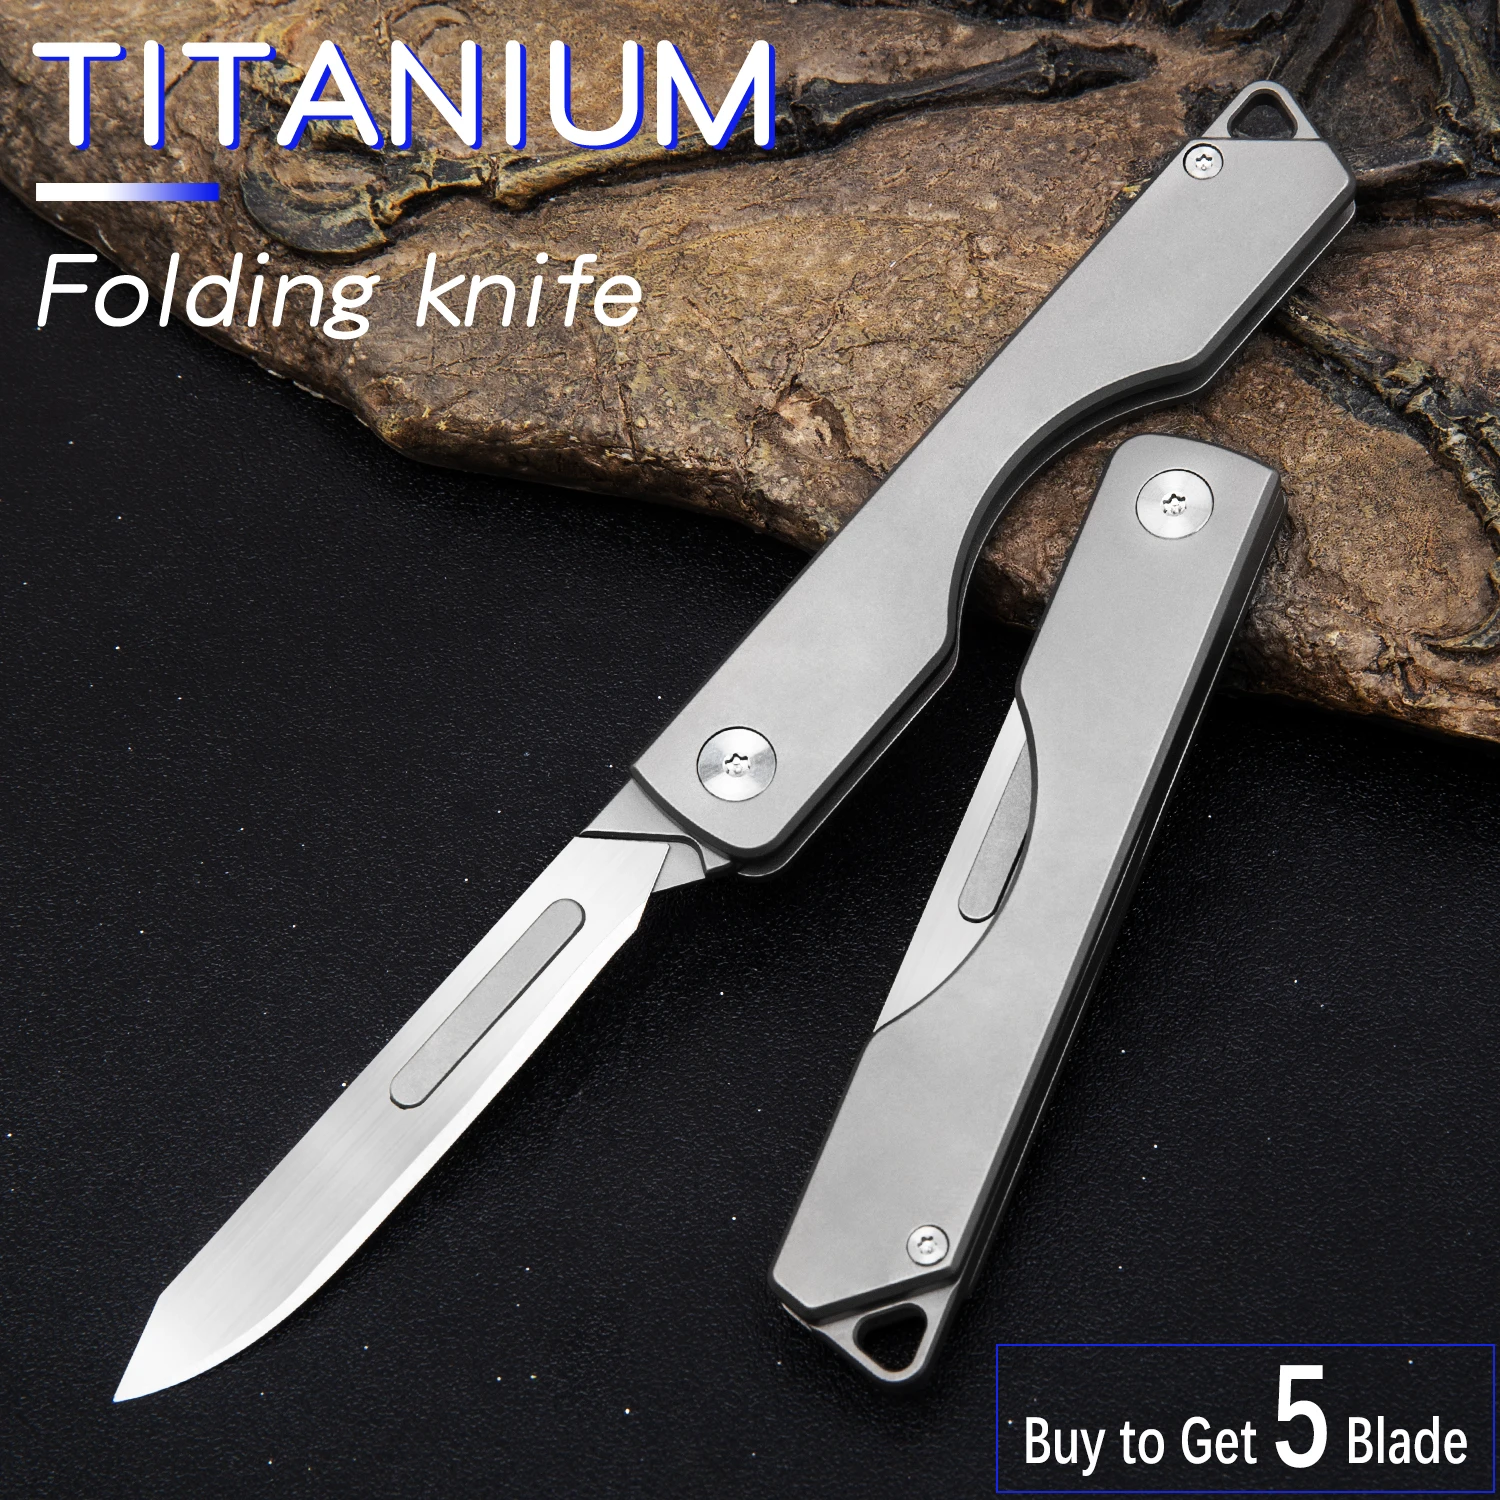 

Titanium Folding Knife Scalpel EDC Outdoor Tool With Carbon Steel Blade Free Shipping